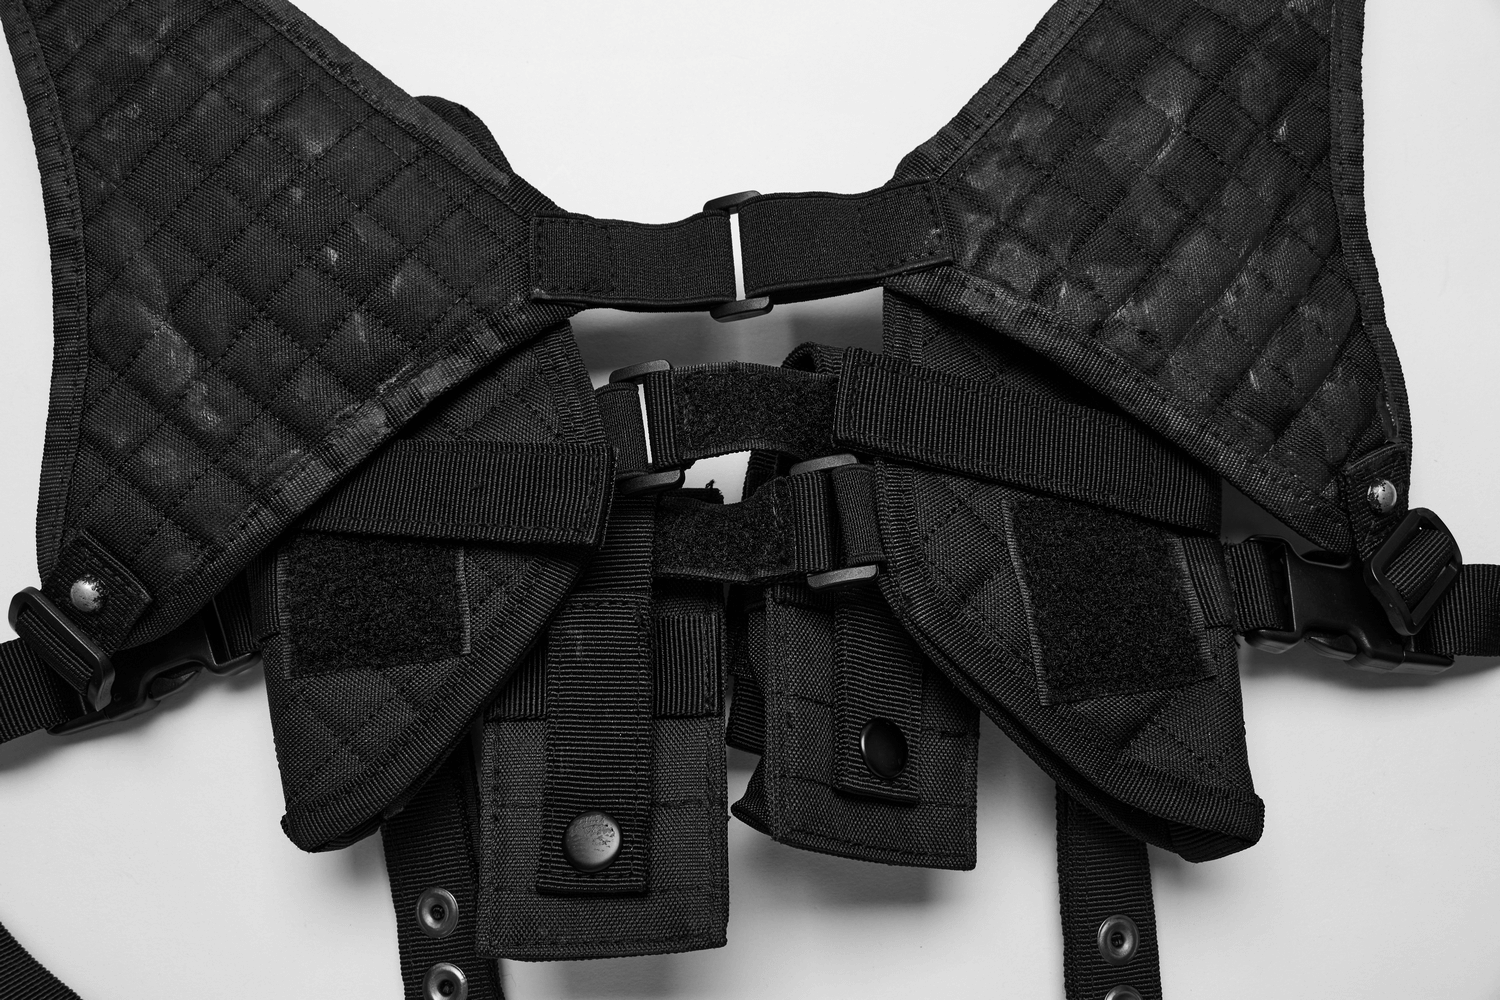 Cyberpunk Adjustable Harness with Detachable Bags